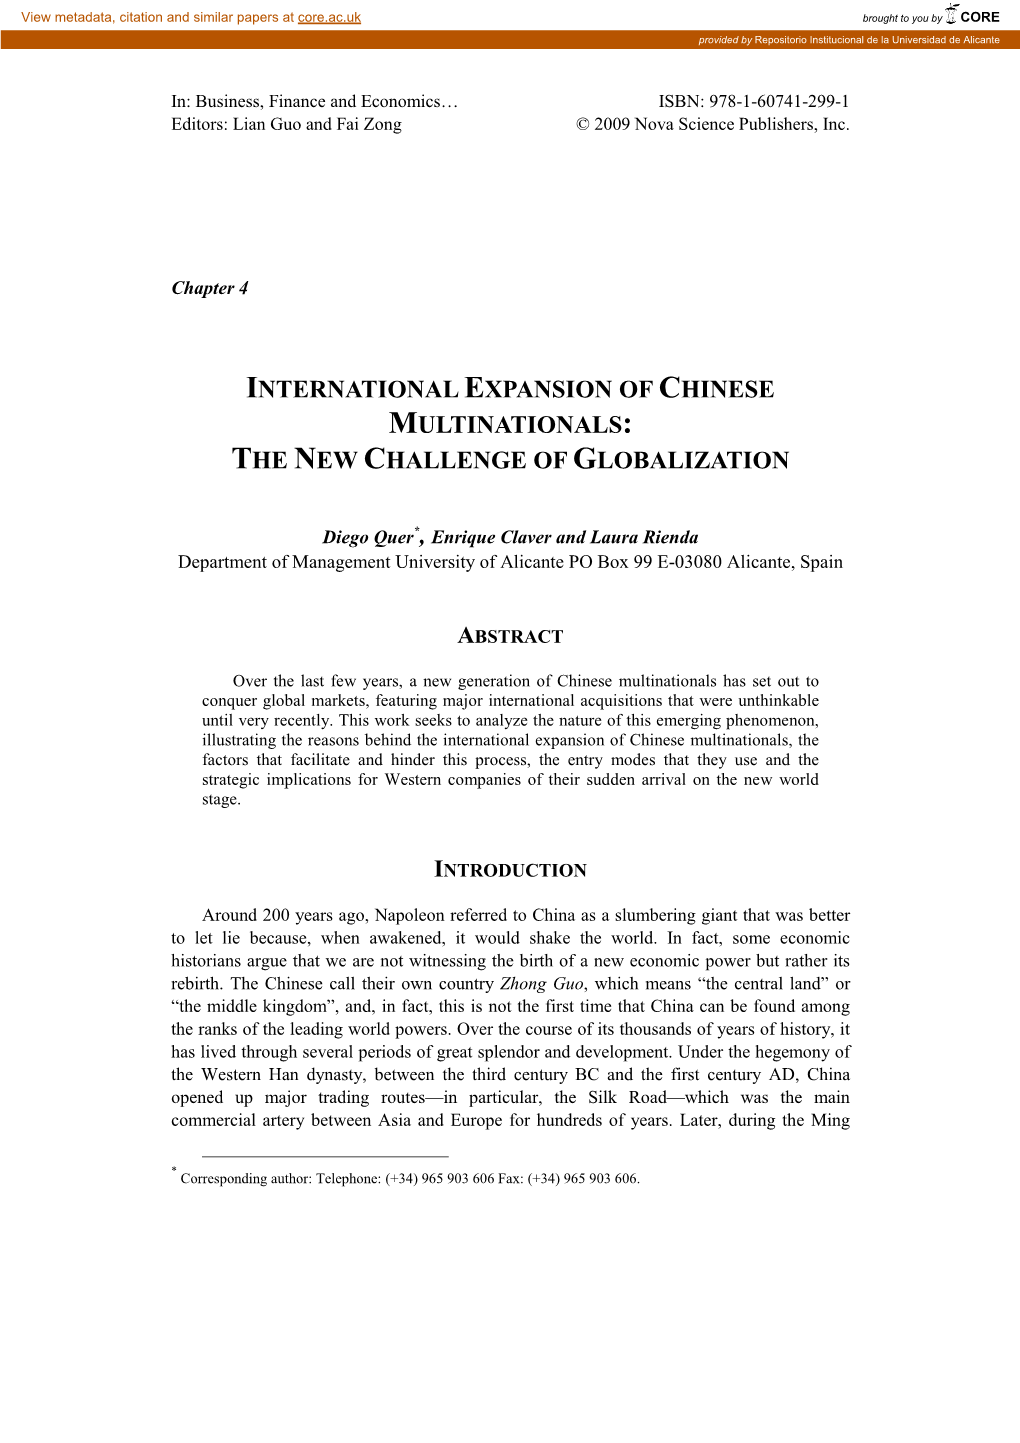 International Expansion of Chinese Multinationals : the New Challenge of Globalization